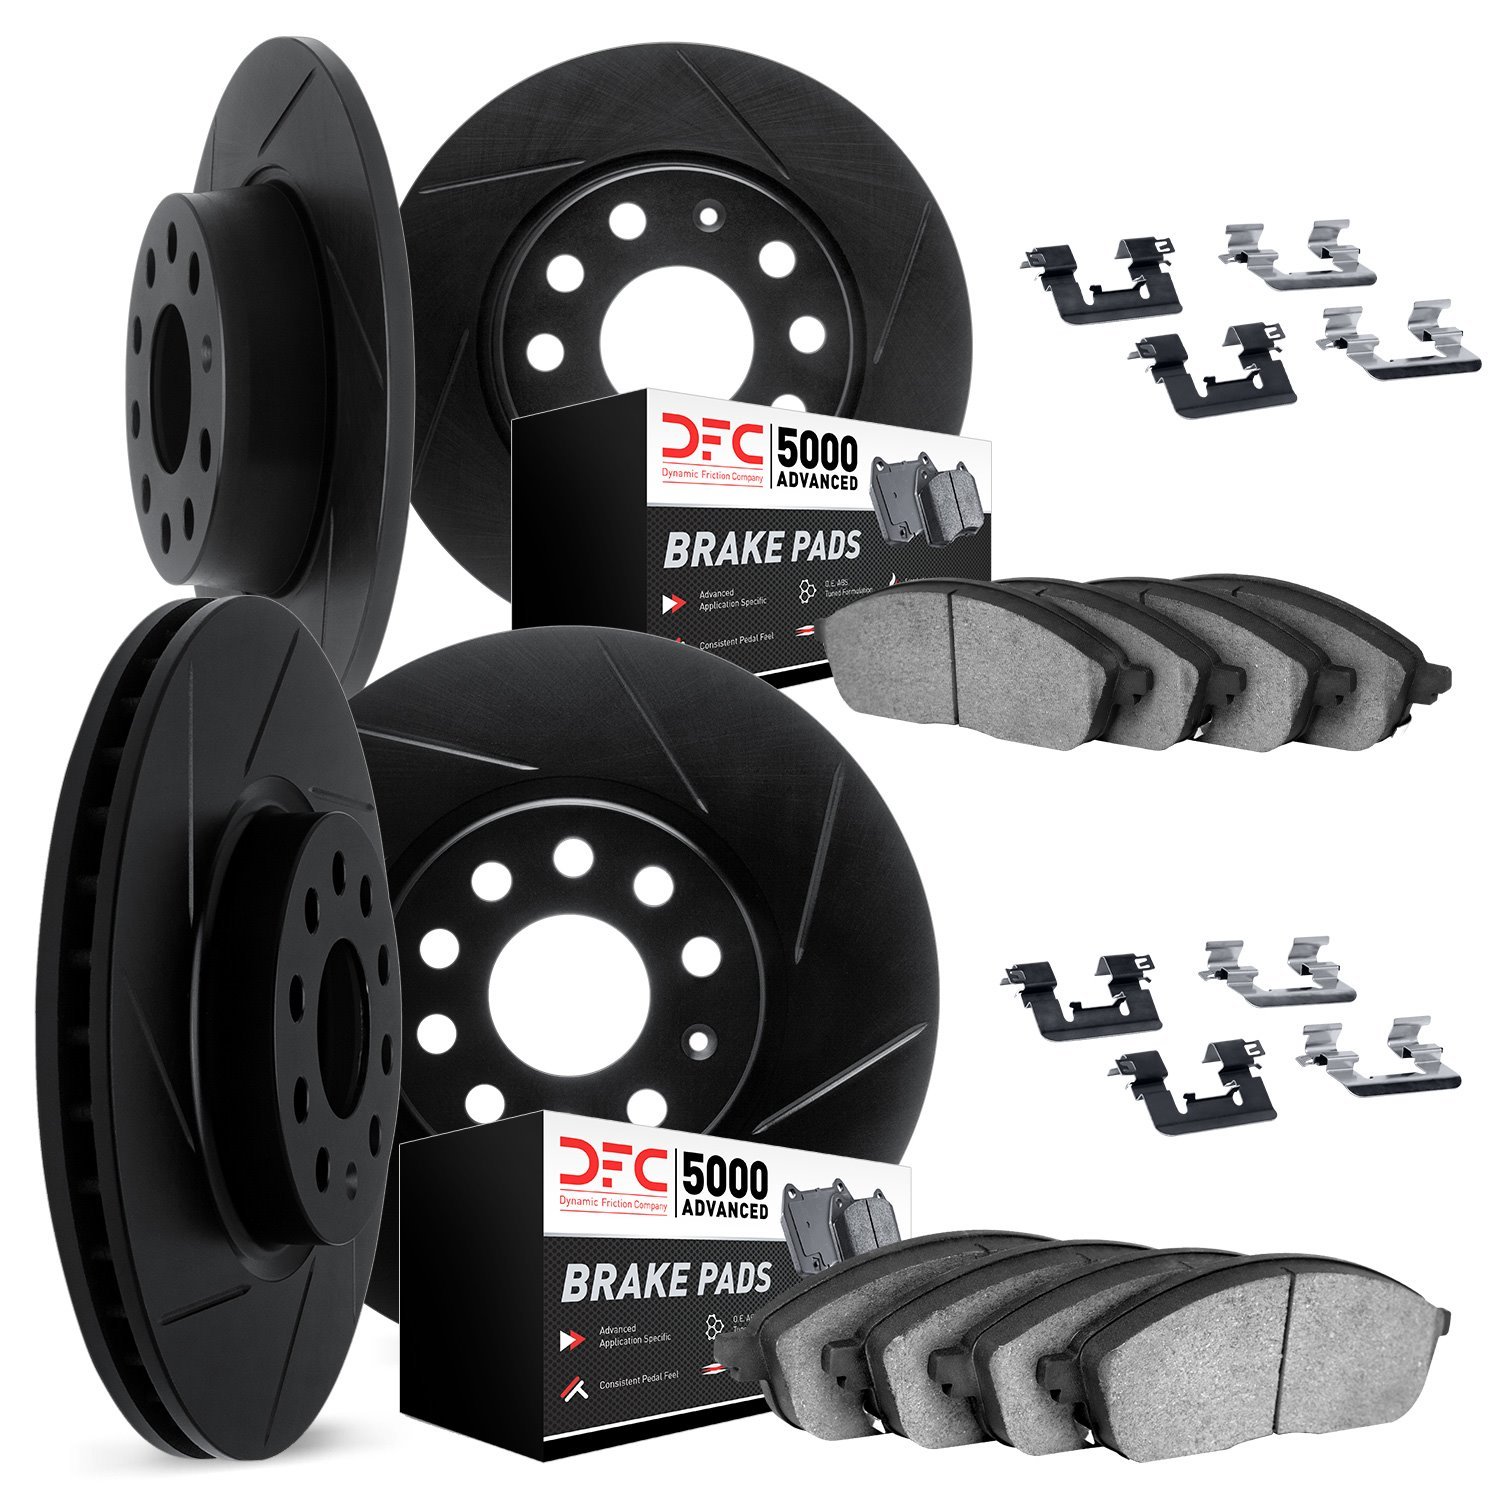 3514-58017 Slotted Brake Rotors w/5000 Advanced Brake Pads Kit & Hardware [Black], 2013-2018 Acura/Honda, Position: Front and Re